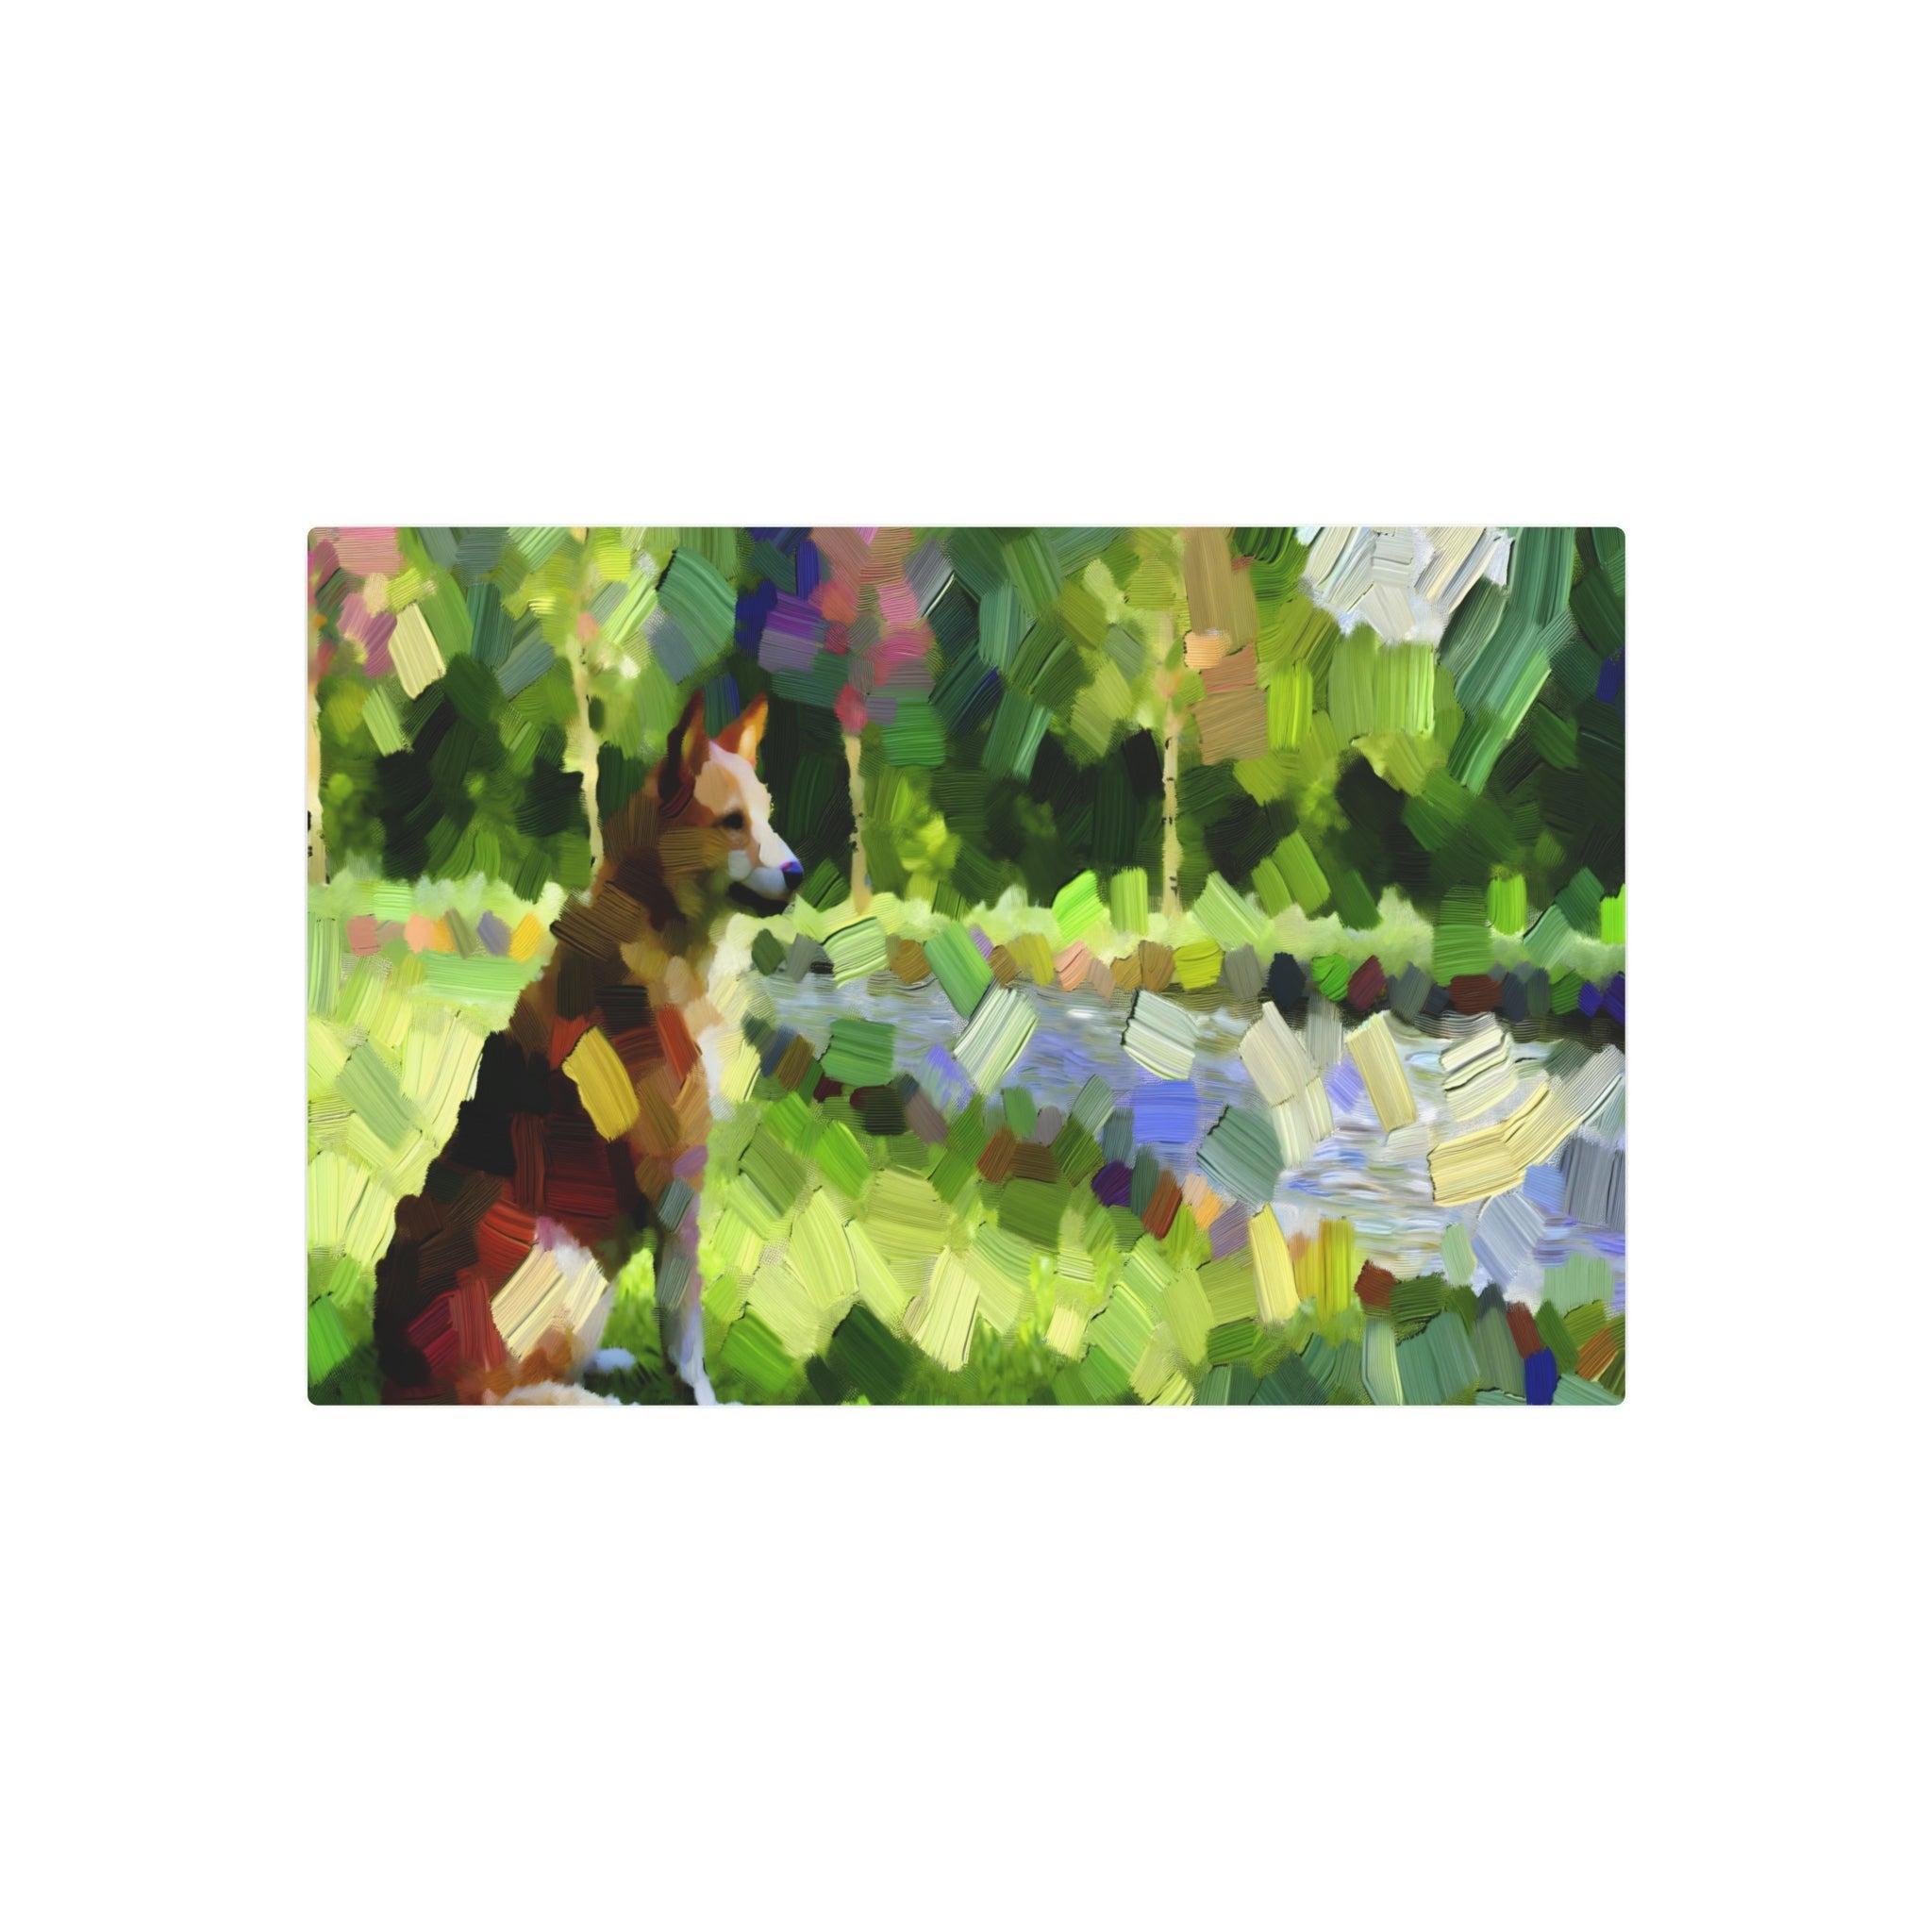 Metal Poster Art | "Impressionistic Western Art Style - Vibrant Outdoor Scene with Domesticated Dog, Emphasizing Light Variations and Loose Brush Strokes" - Metal Poster Art 30″ x 20″ (Horizontal) 0.12''